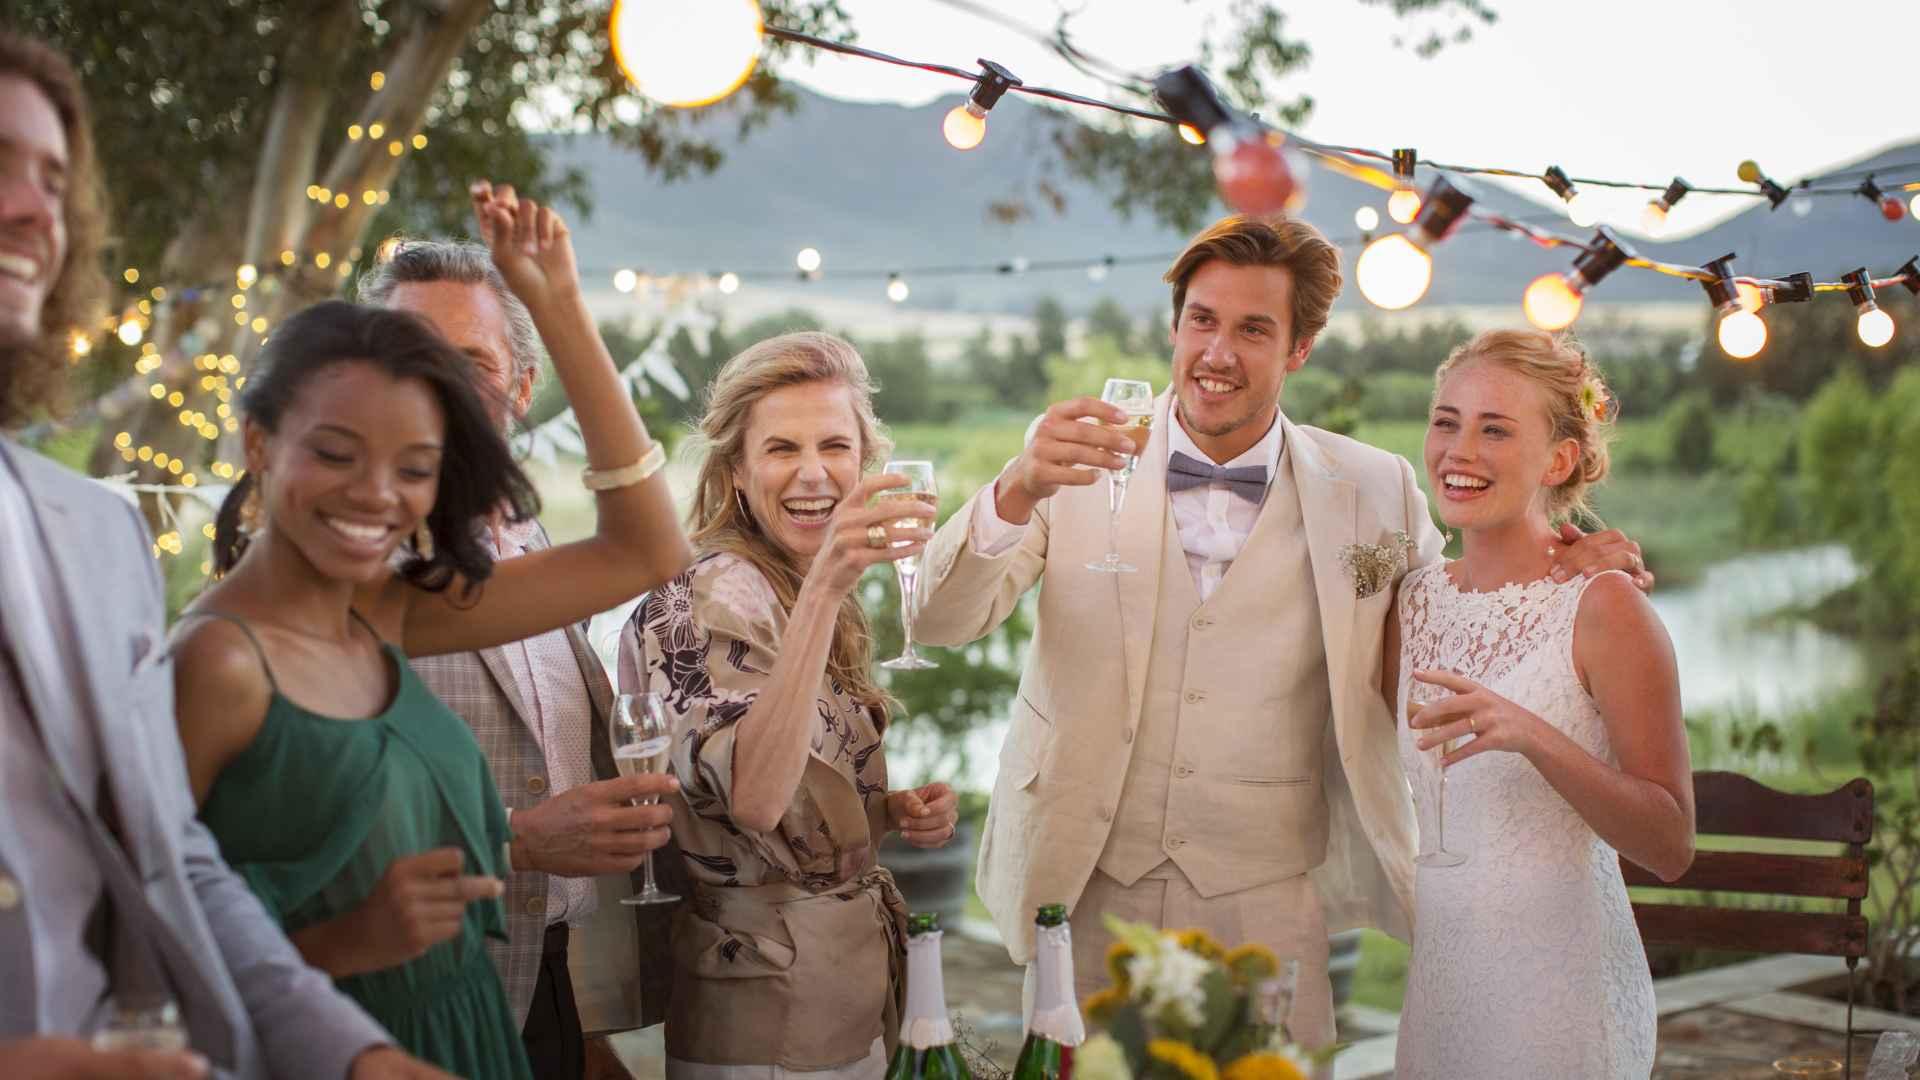 8 Wedding Expenses That Waste Your Money